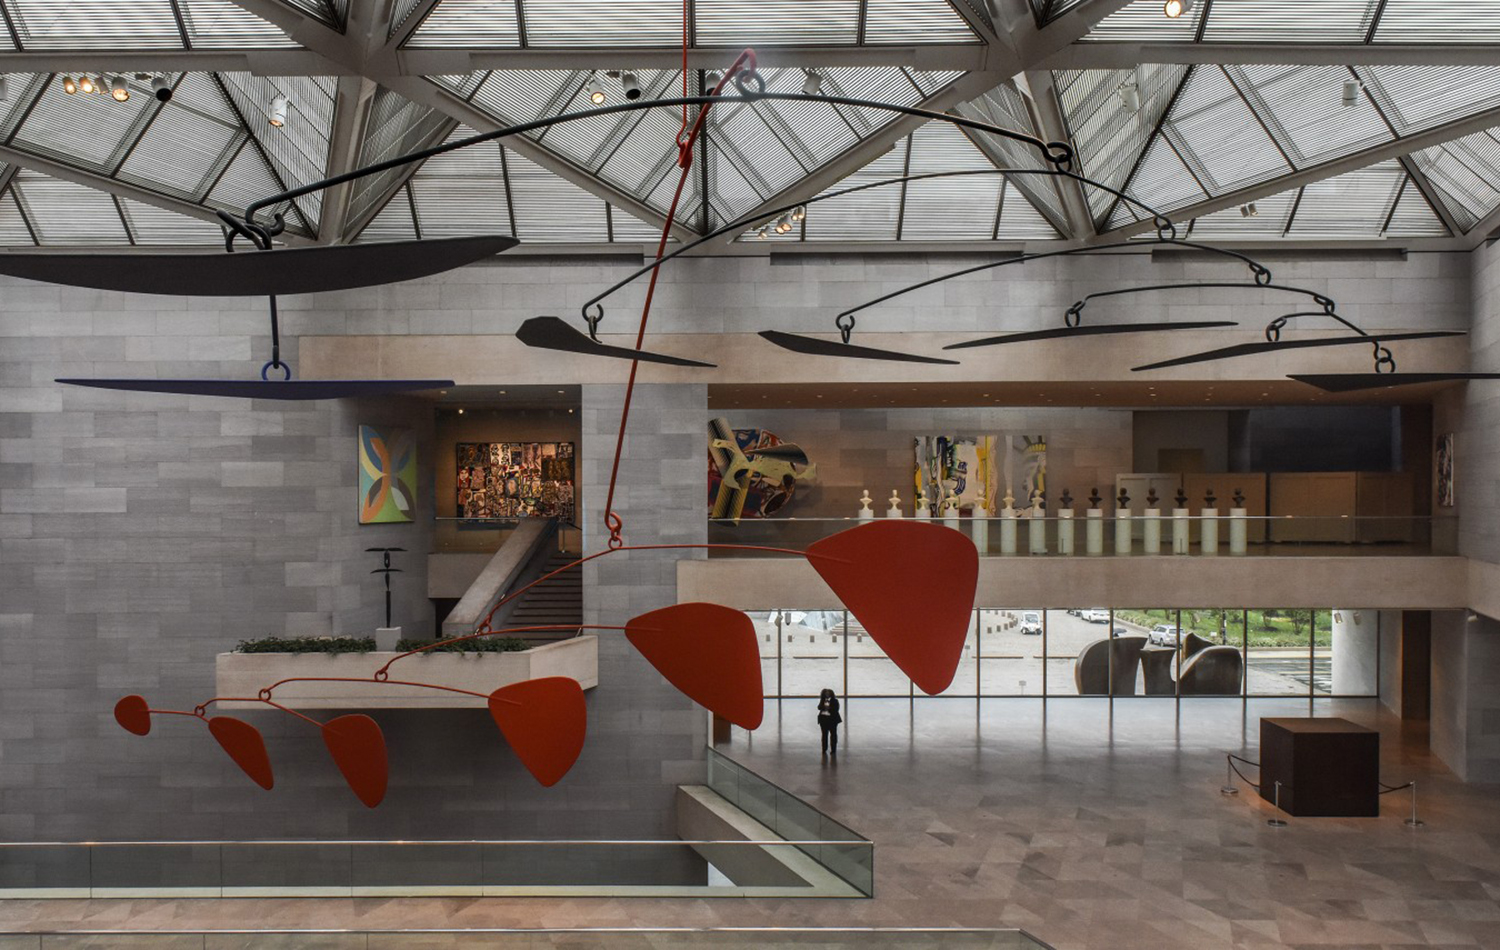  Alexander Calder’s 76-foot-long mobile still hangs in the atrium. (Bill O'Leary/The Washington Post) 